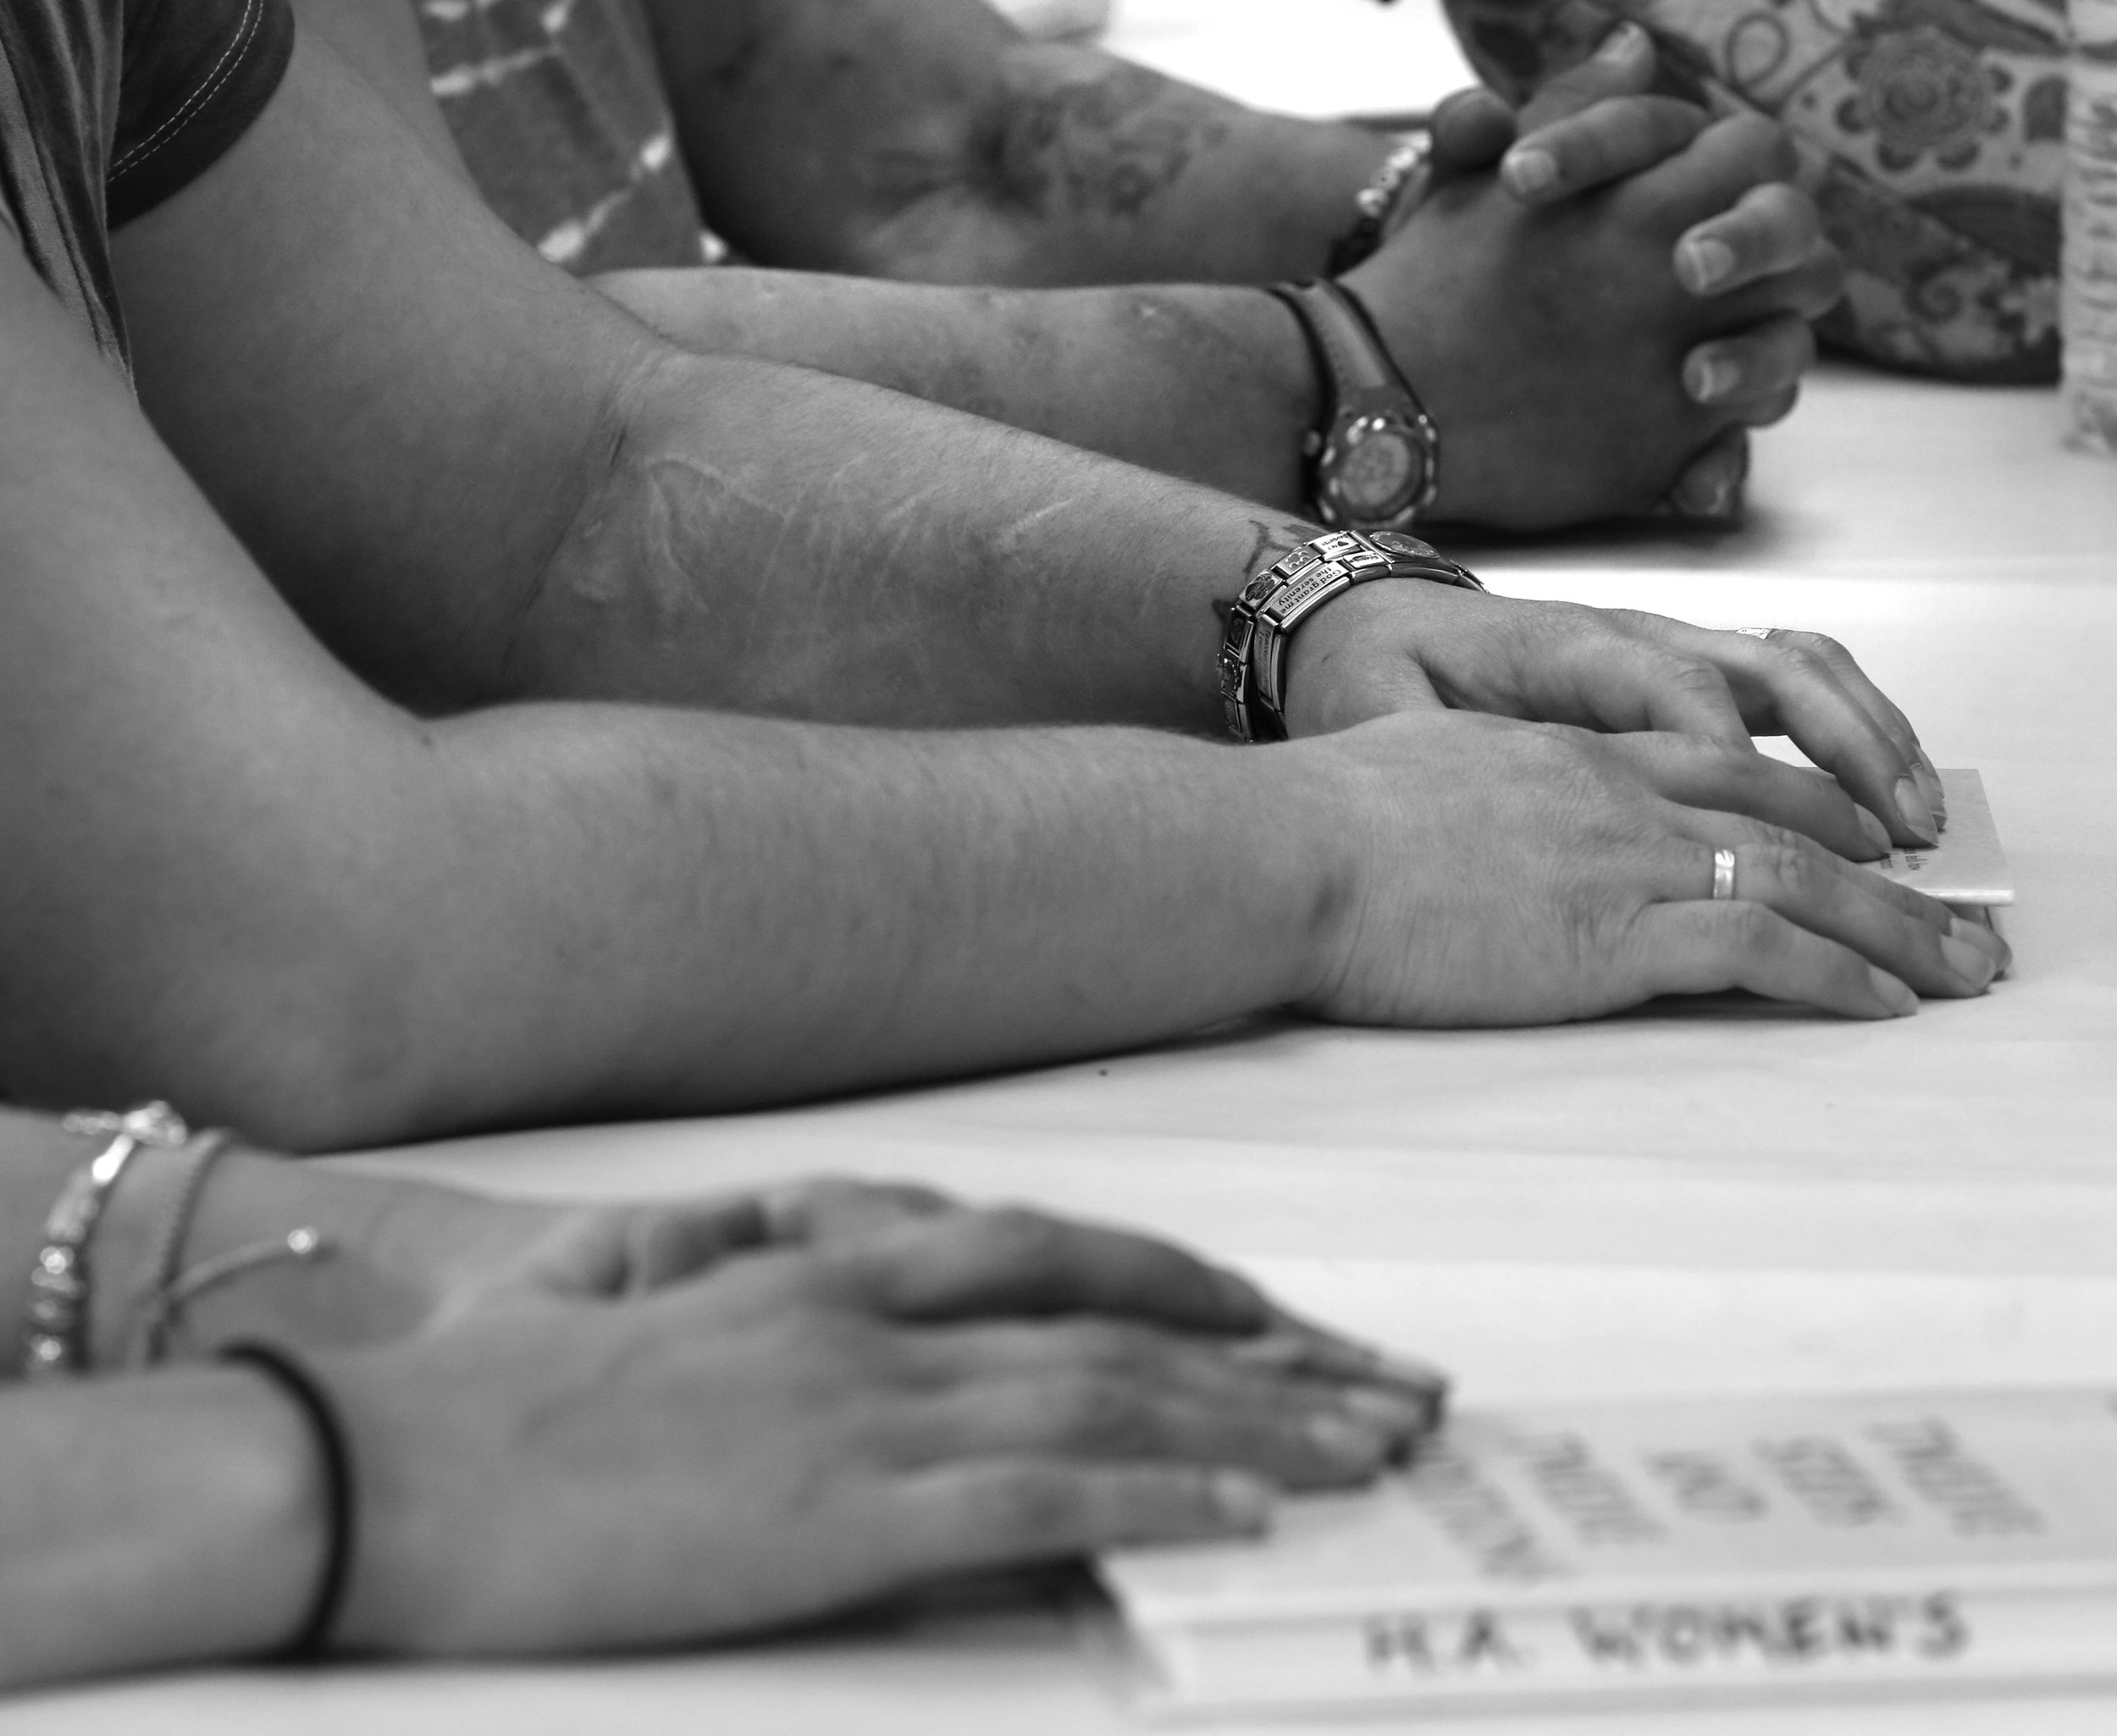  The women’s Heroin Anonymous 12 Step group opened at the R House in Toledo, Ohio, on May 1, 2014. With about six women regularly attending, the group offers support and counseling to members as they battle addiction and work to stay in recovery.   